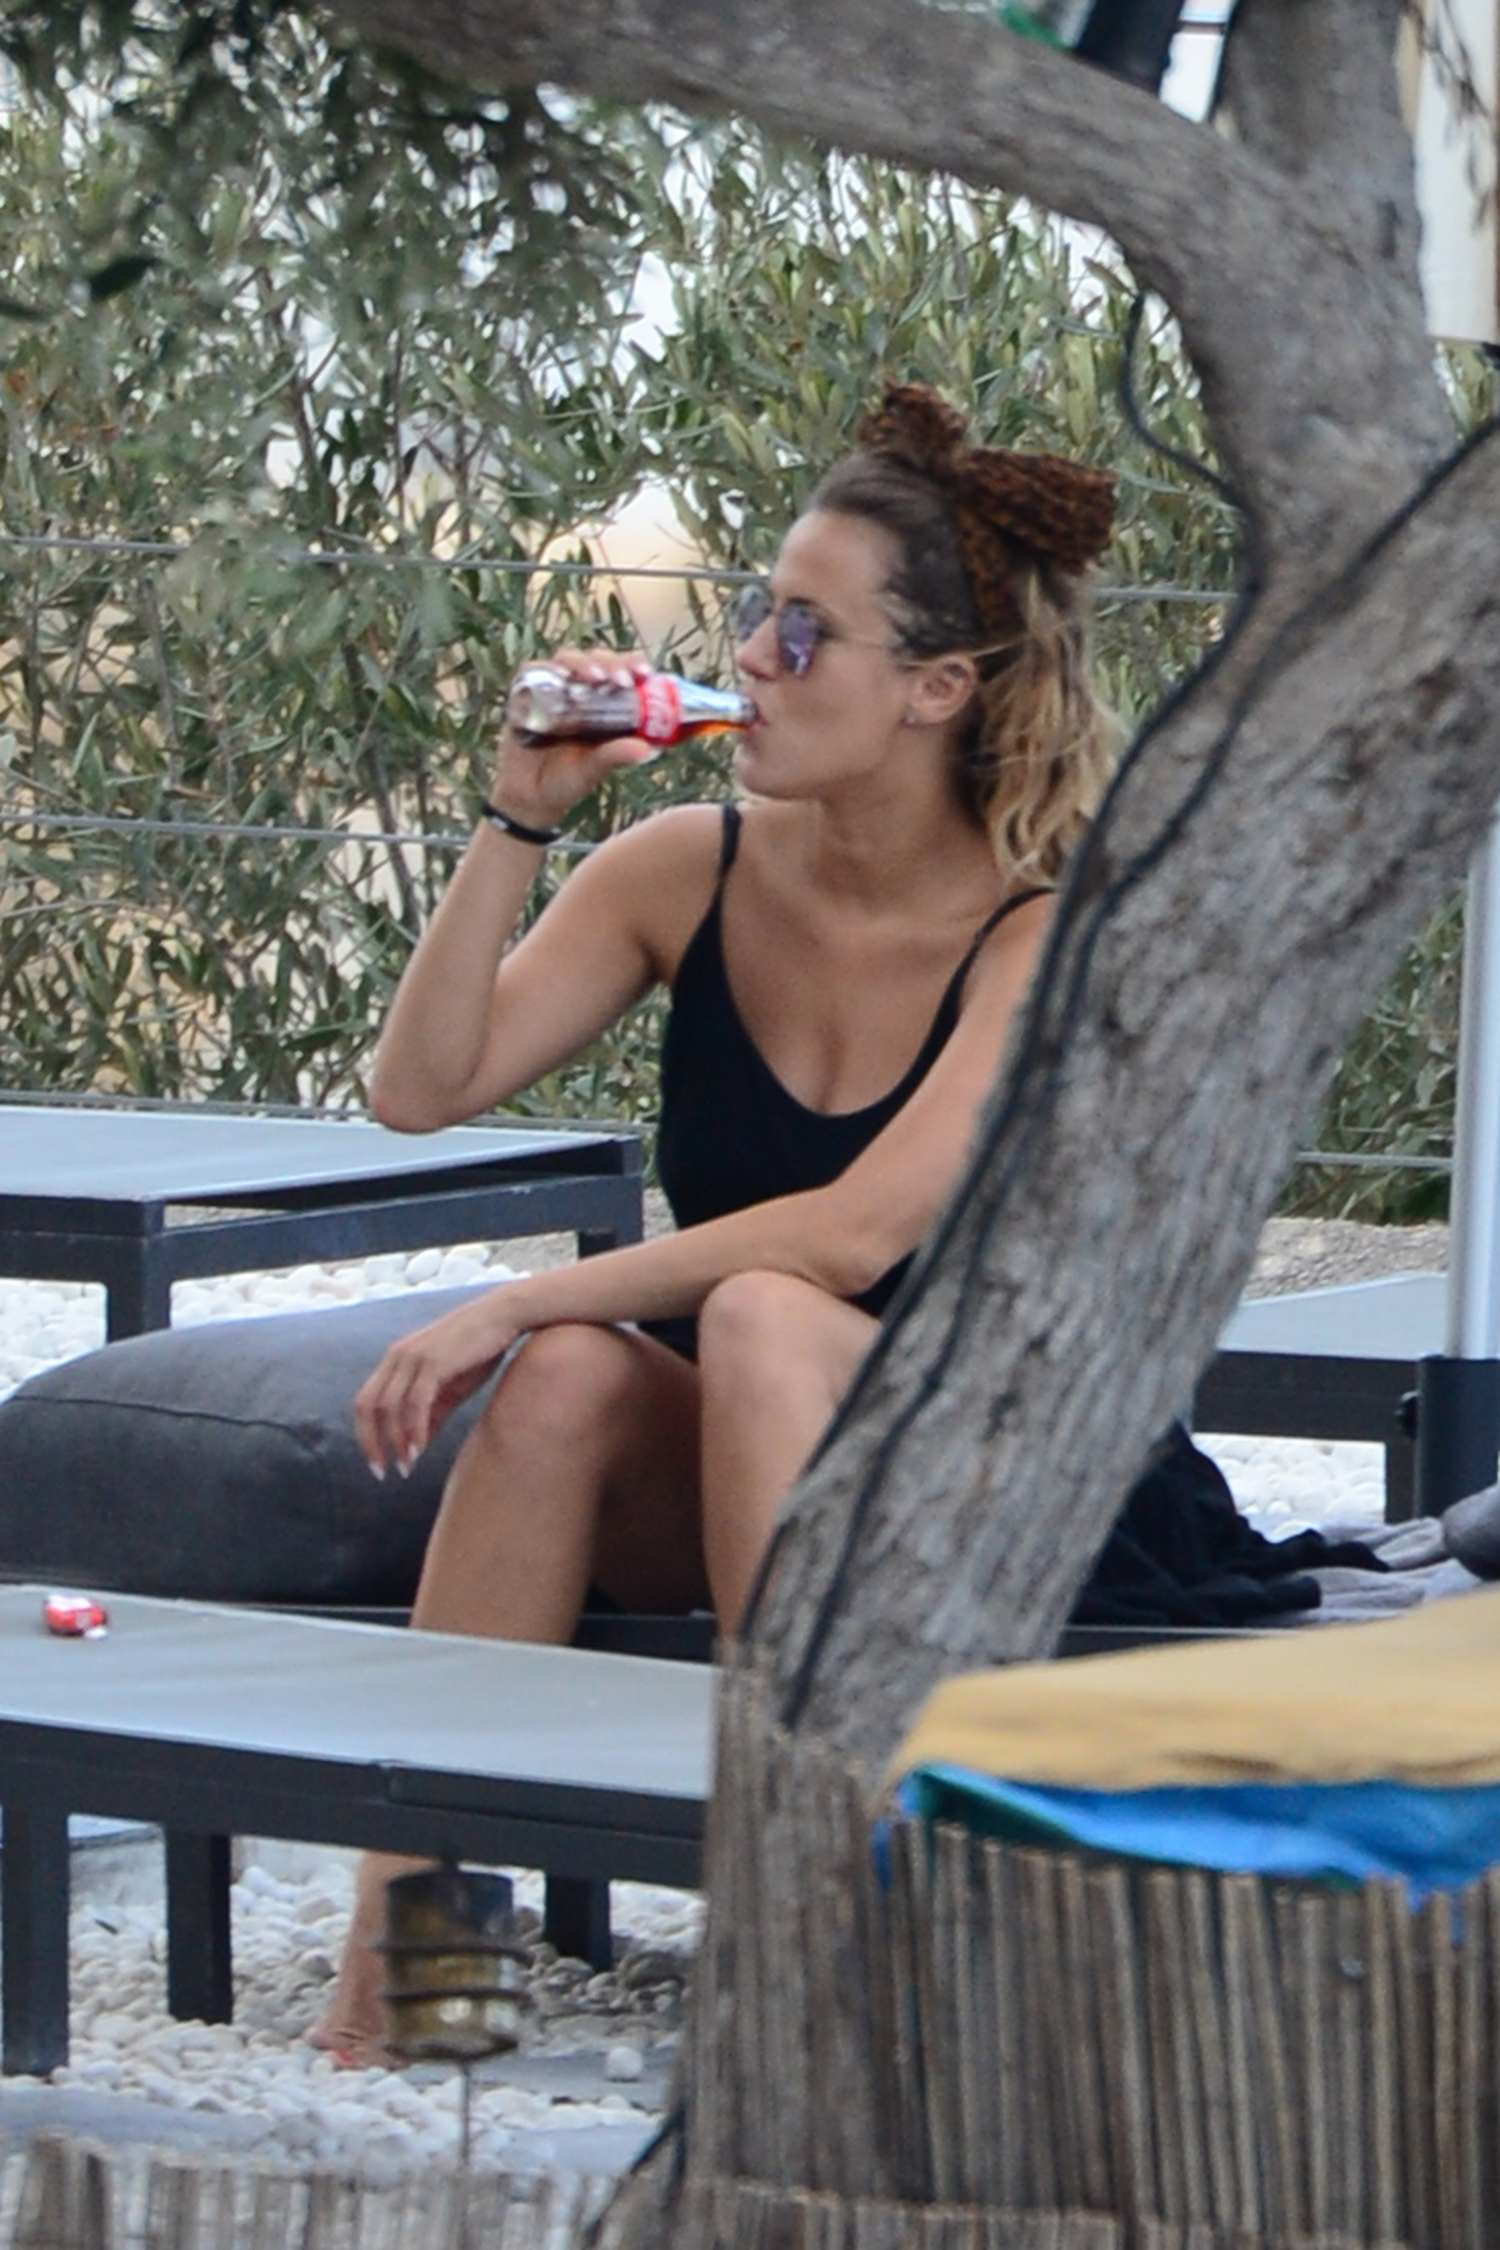 Caroline Flack Vacationing With His Girlfriend in Ibiza